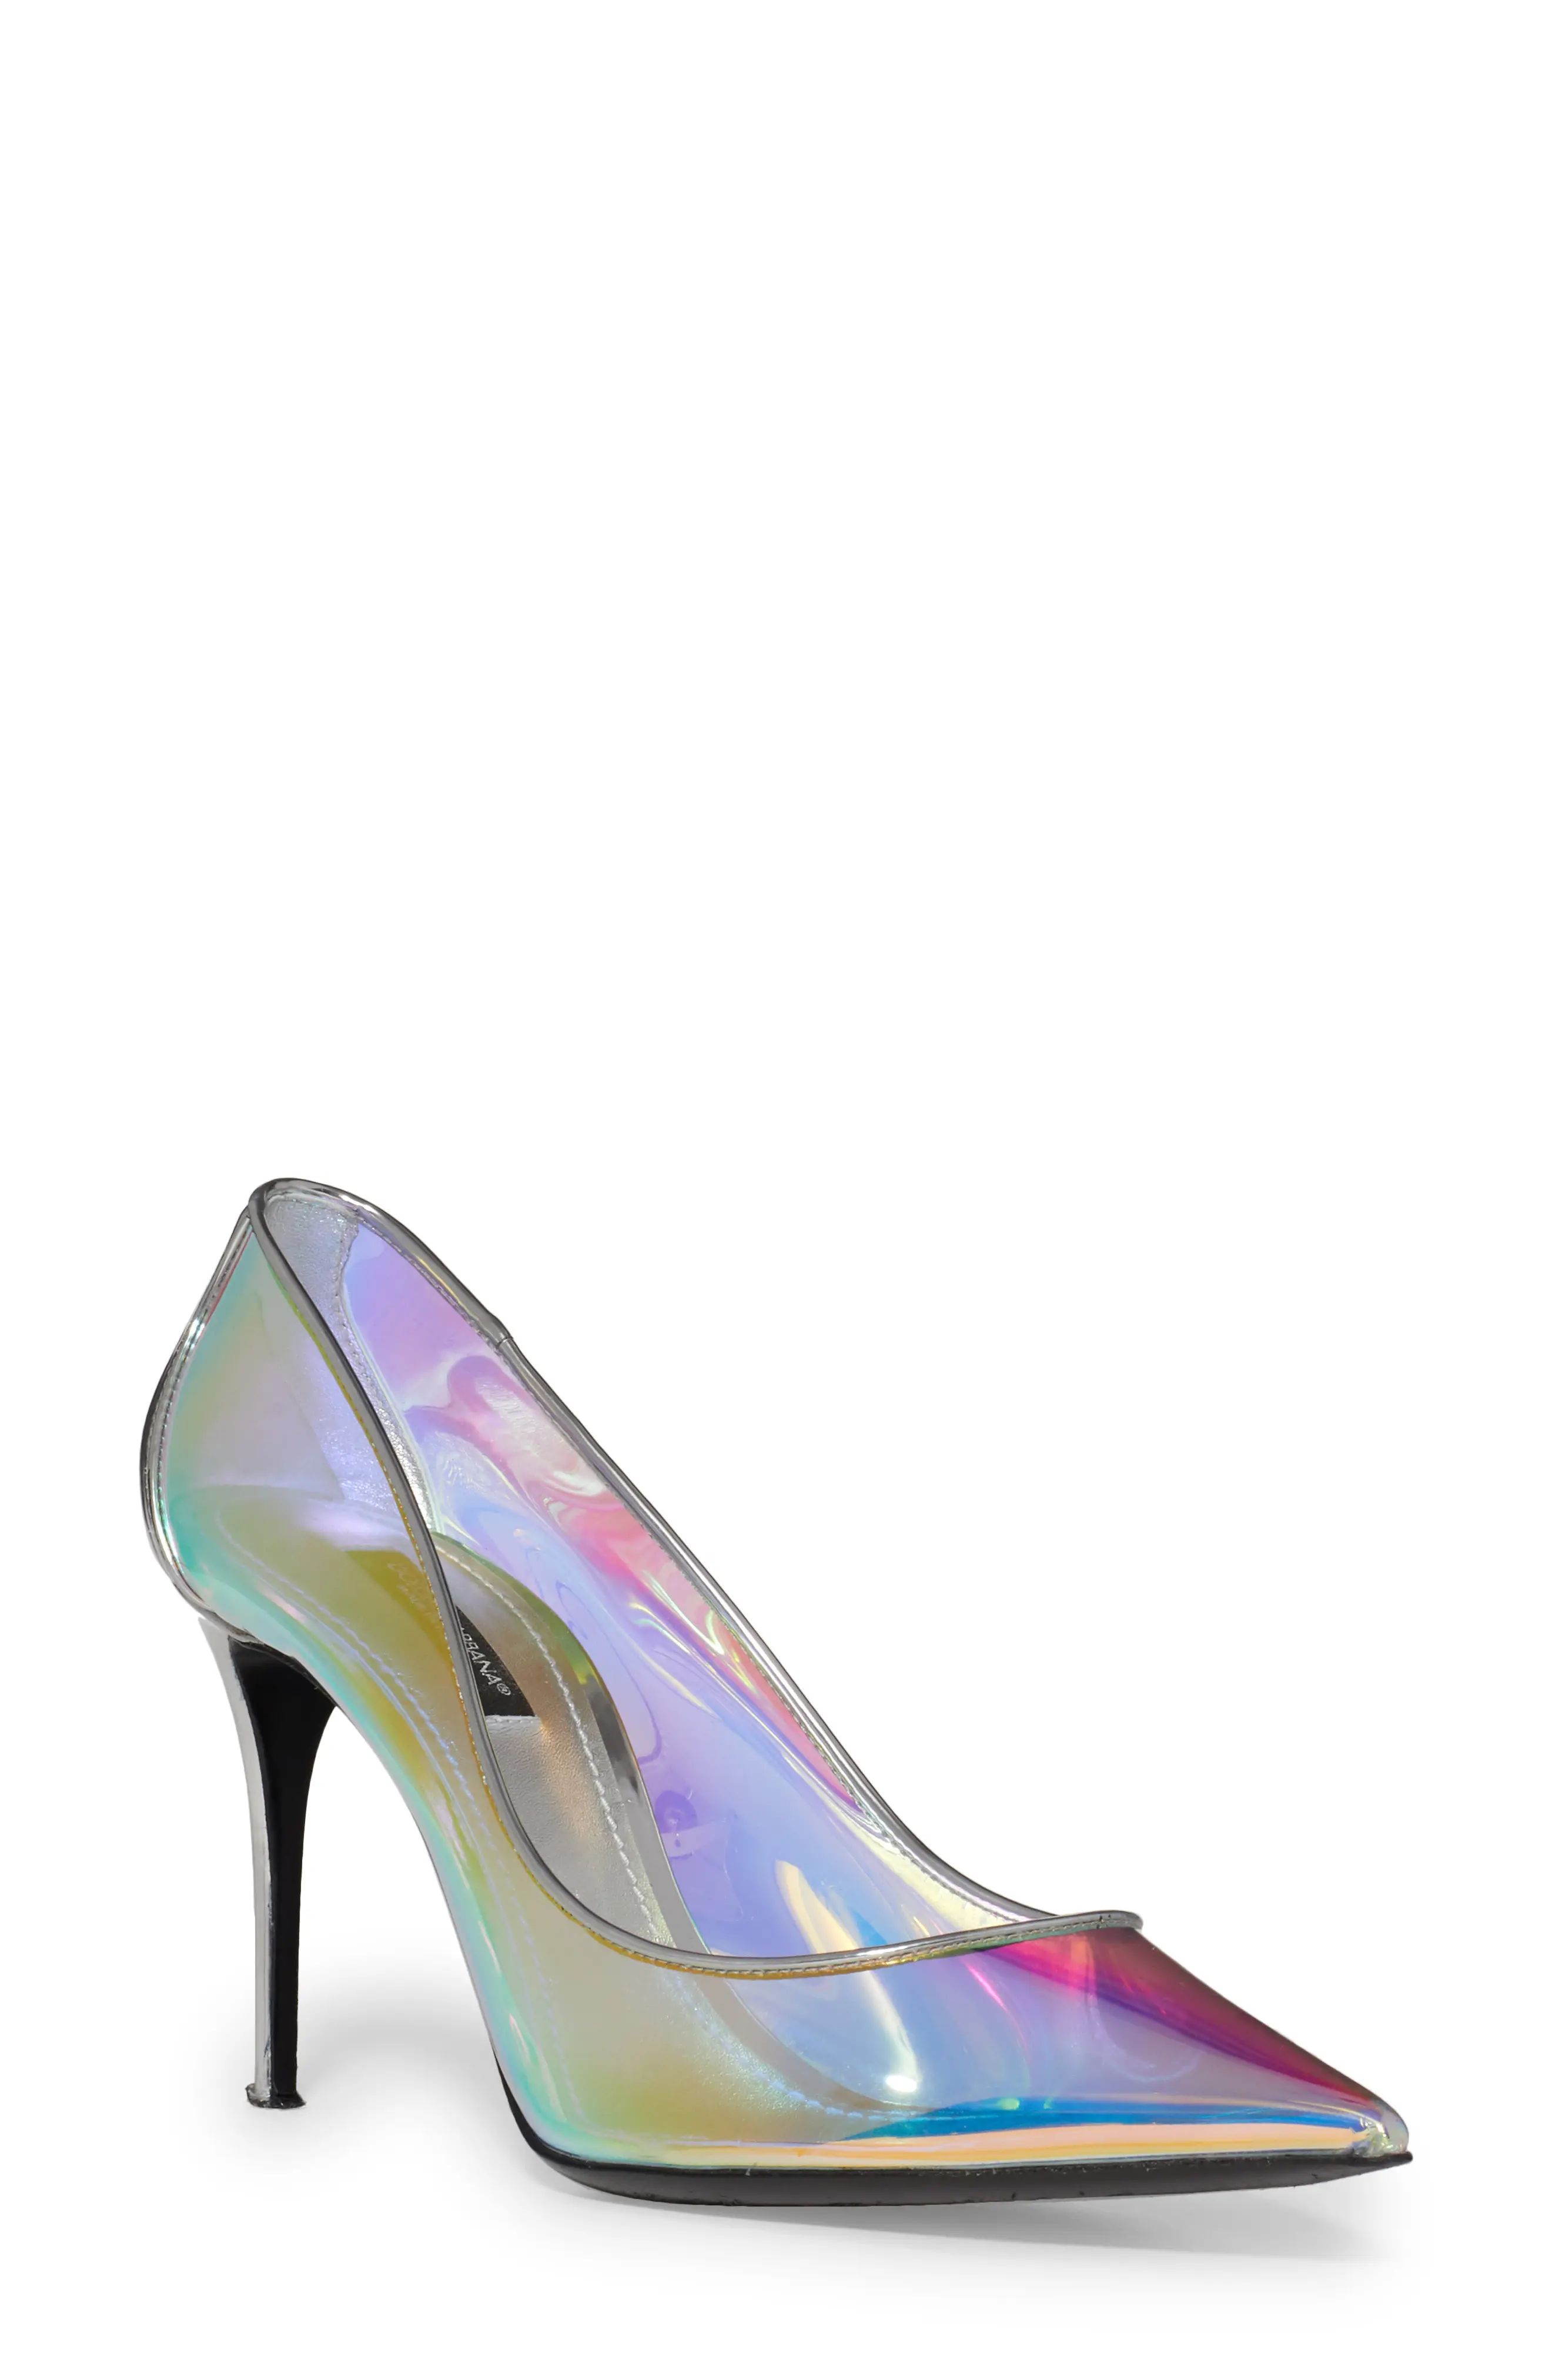 Dolce & Gabbana Cardinale Iridescent Pointed Toe Pump, Size 6Us in Iridescente at Nordstrom | Nordstrom